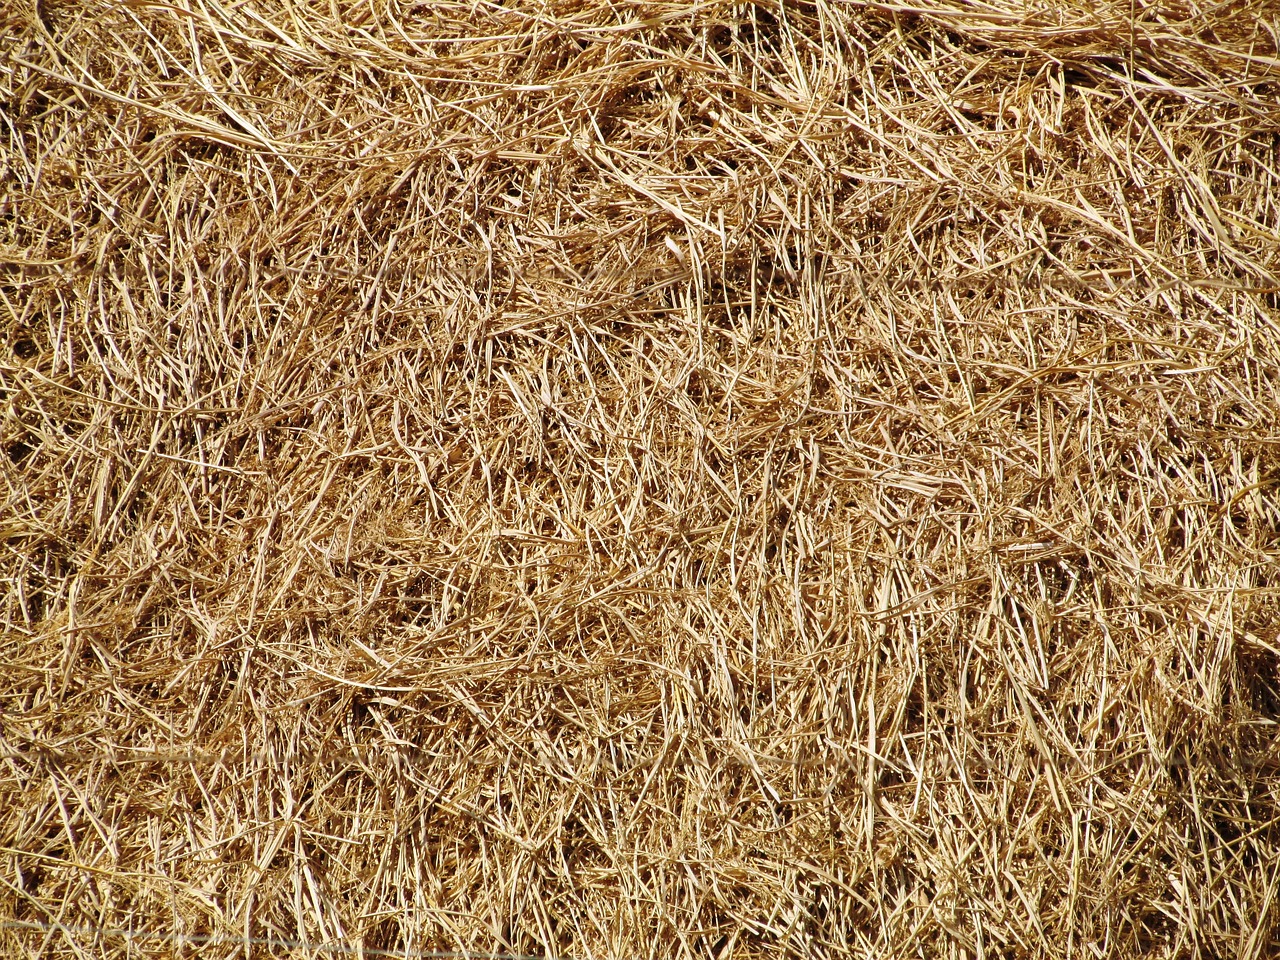 a bird sitting on top of a pile of hay, a stock photo, minimalism, stereogram, shiny golden, hair texture, ffffound